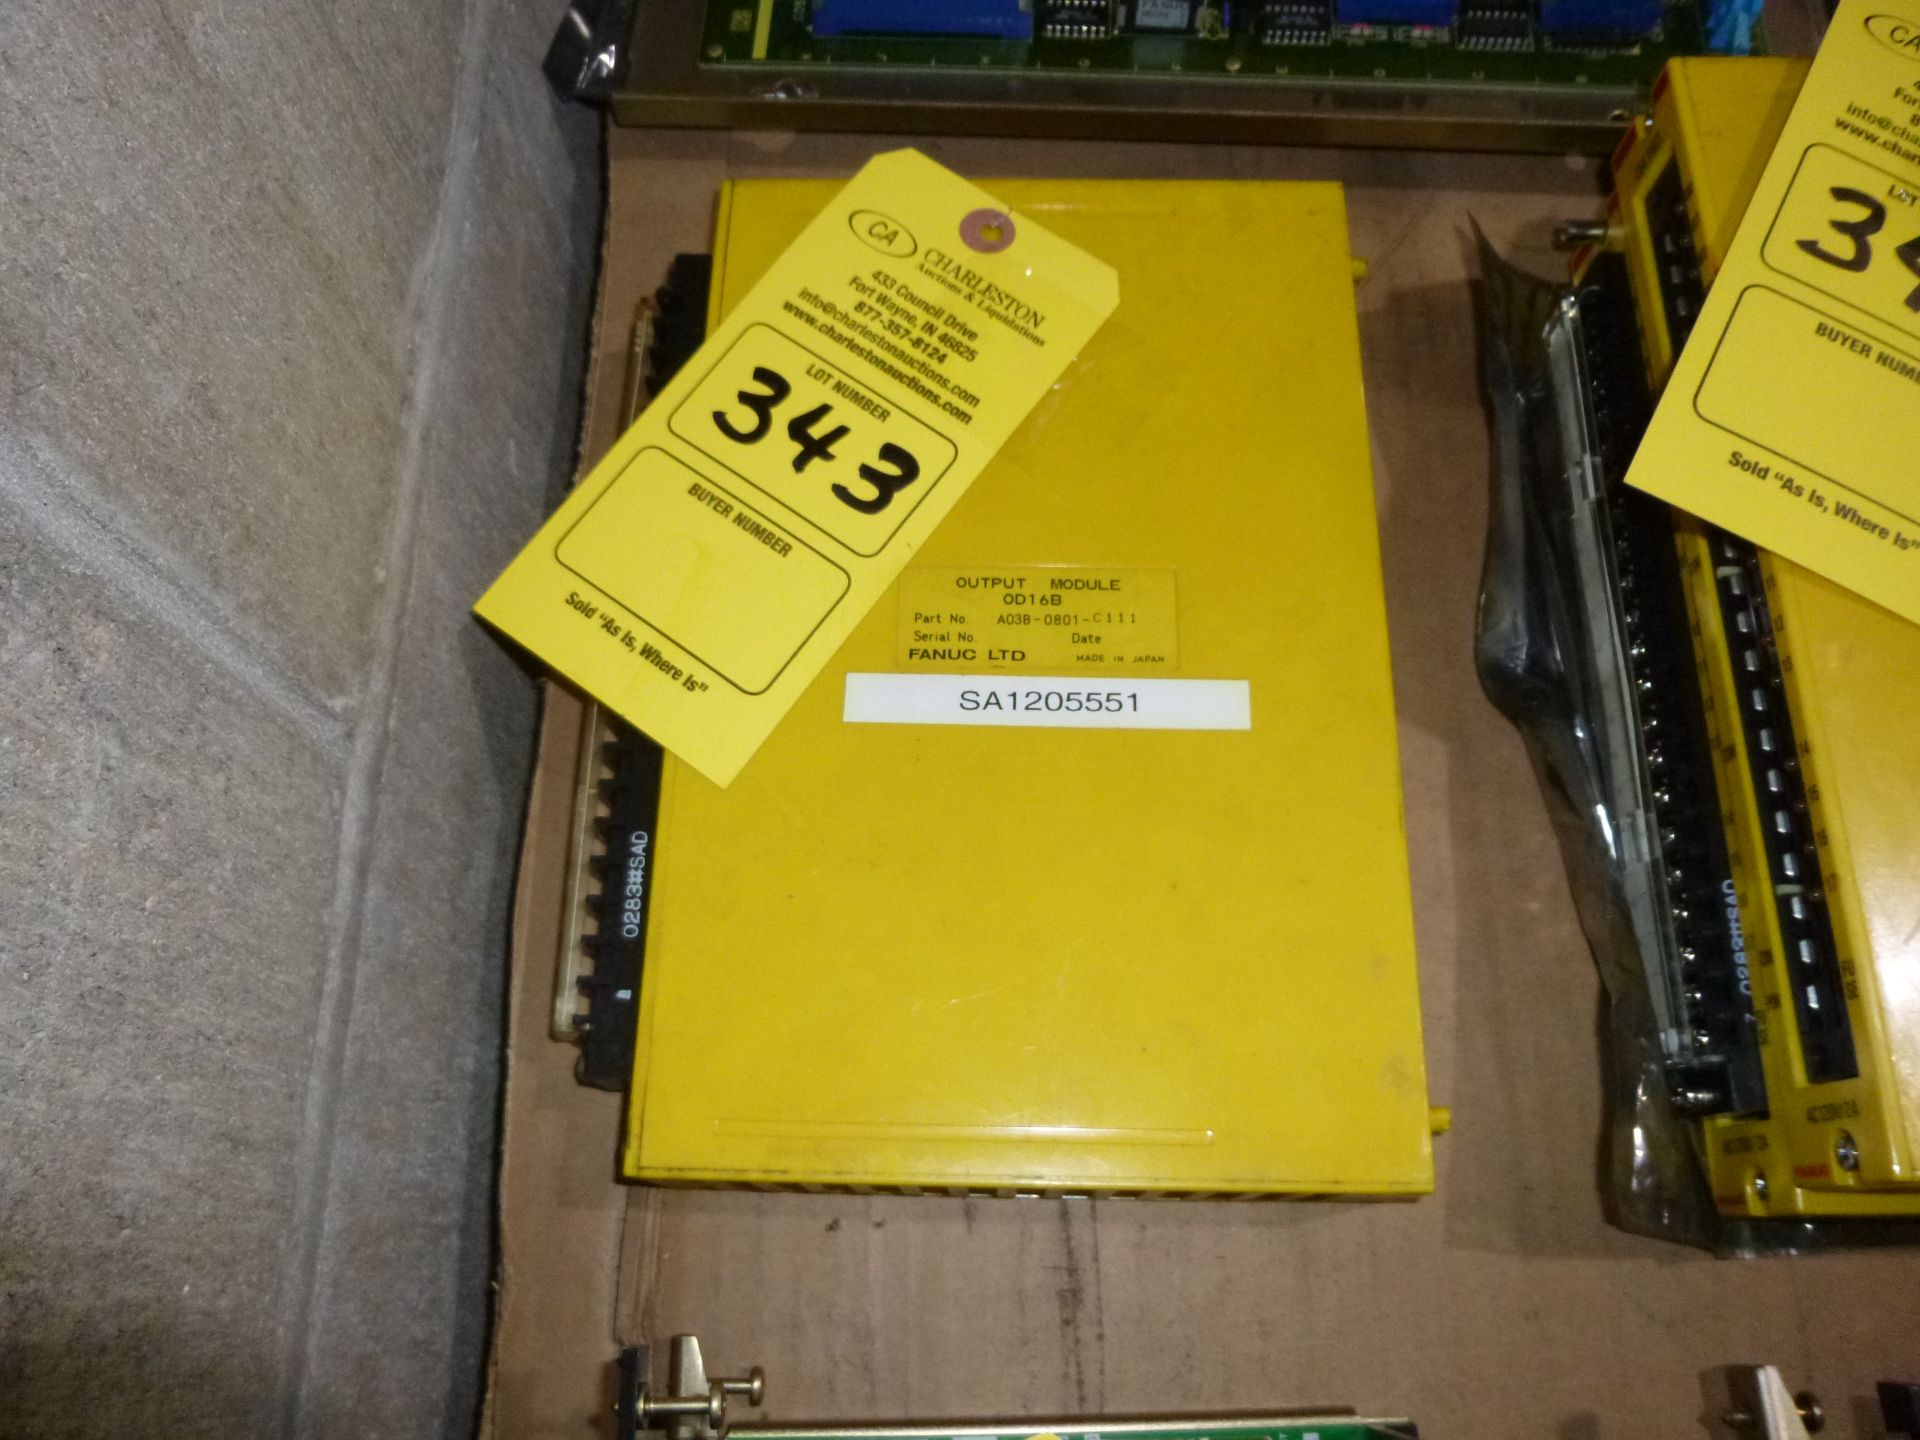 Fanuc output module model A03B-0801-C111, as always with Brolyn LLC auctions, all lots can be picked